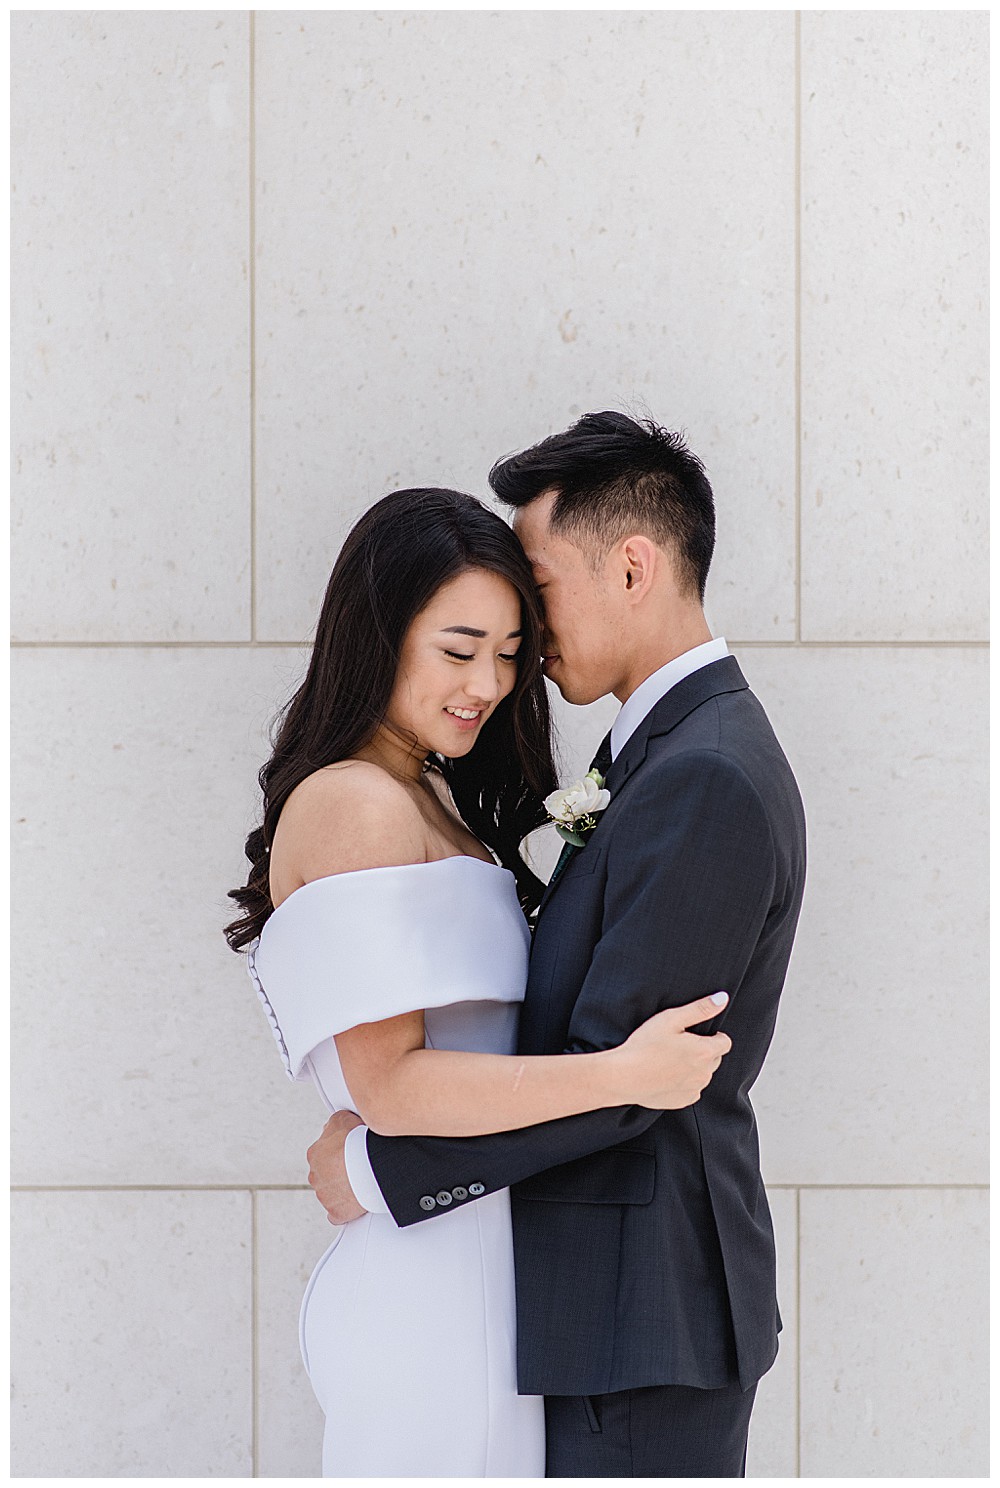 bride and groom editorial publication couples portraits romantic whimsical emotional first look aga khan museum downtown toronto modern romantic wedding jacqueline james photography